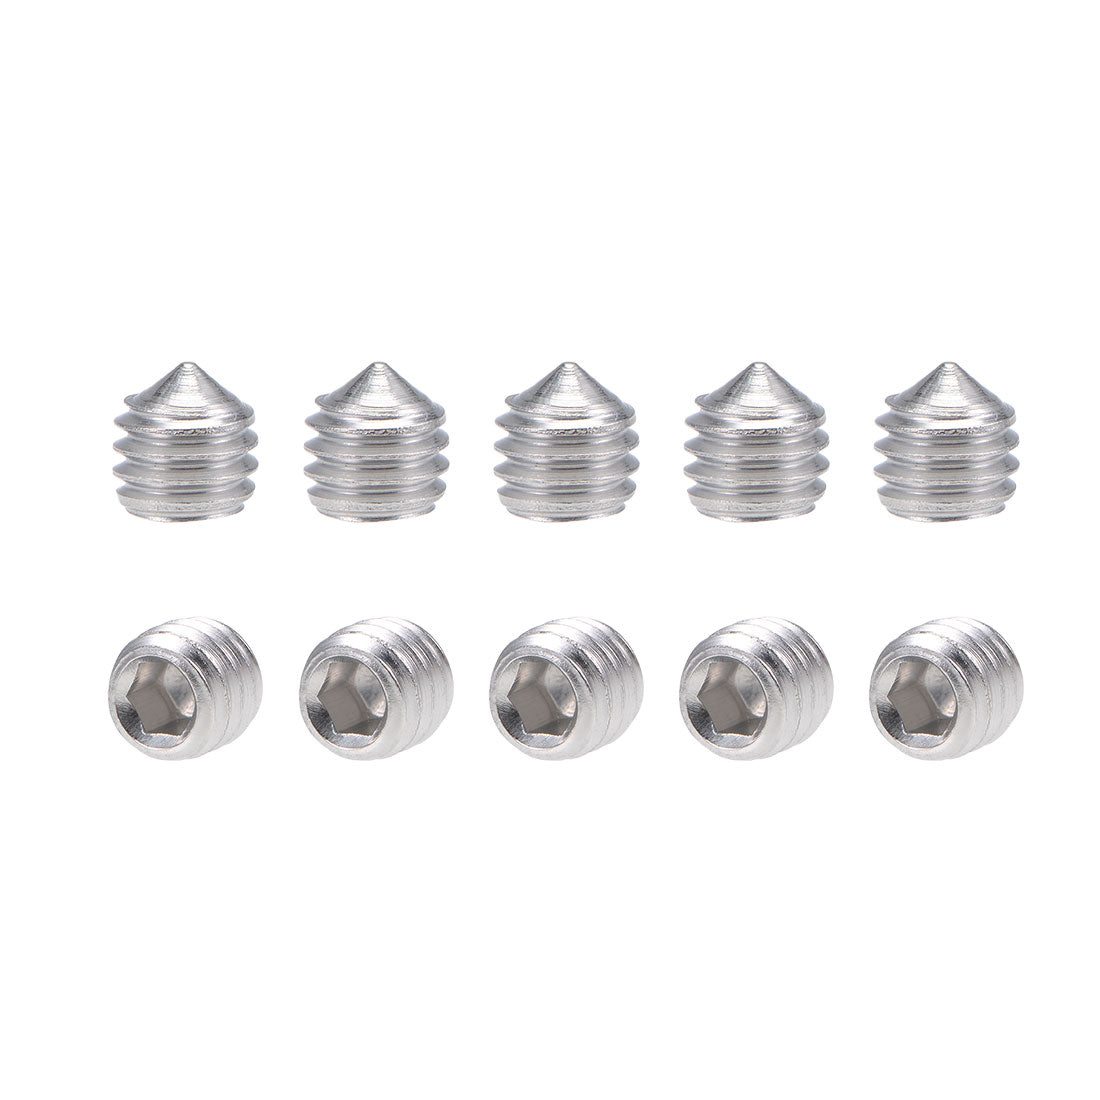 uxcell Uxcell 40Pcs M6x6mm Internal Hex Socket Set Grub Screws Cone Point 304 Stainless Steel Screw